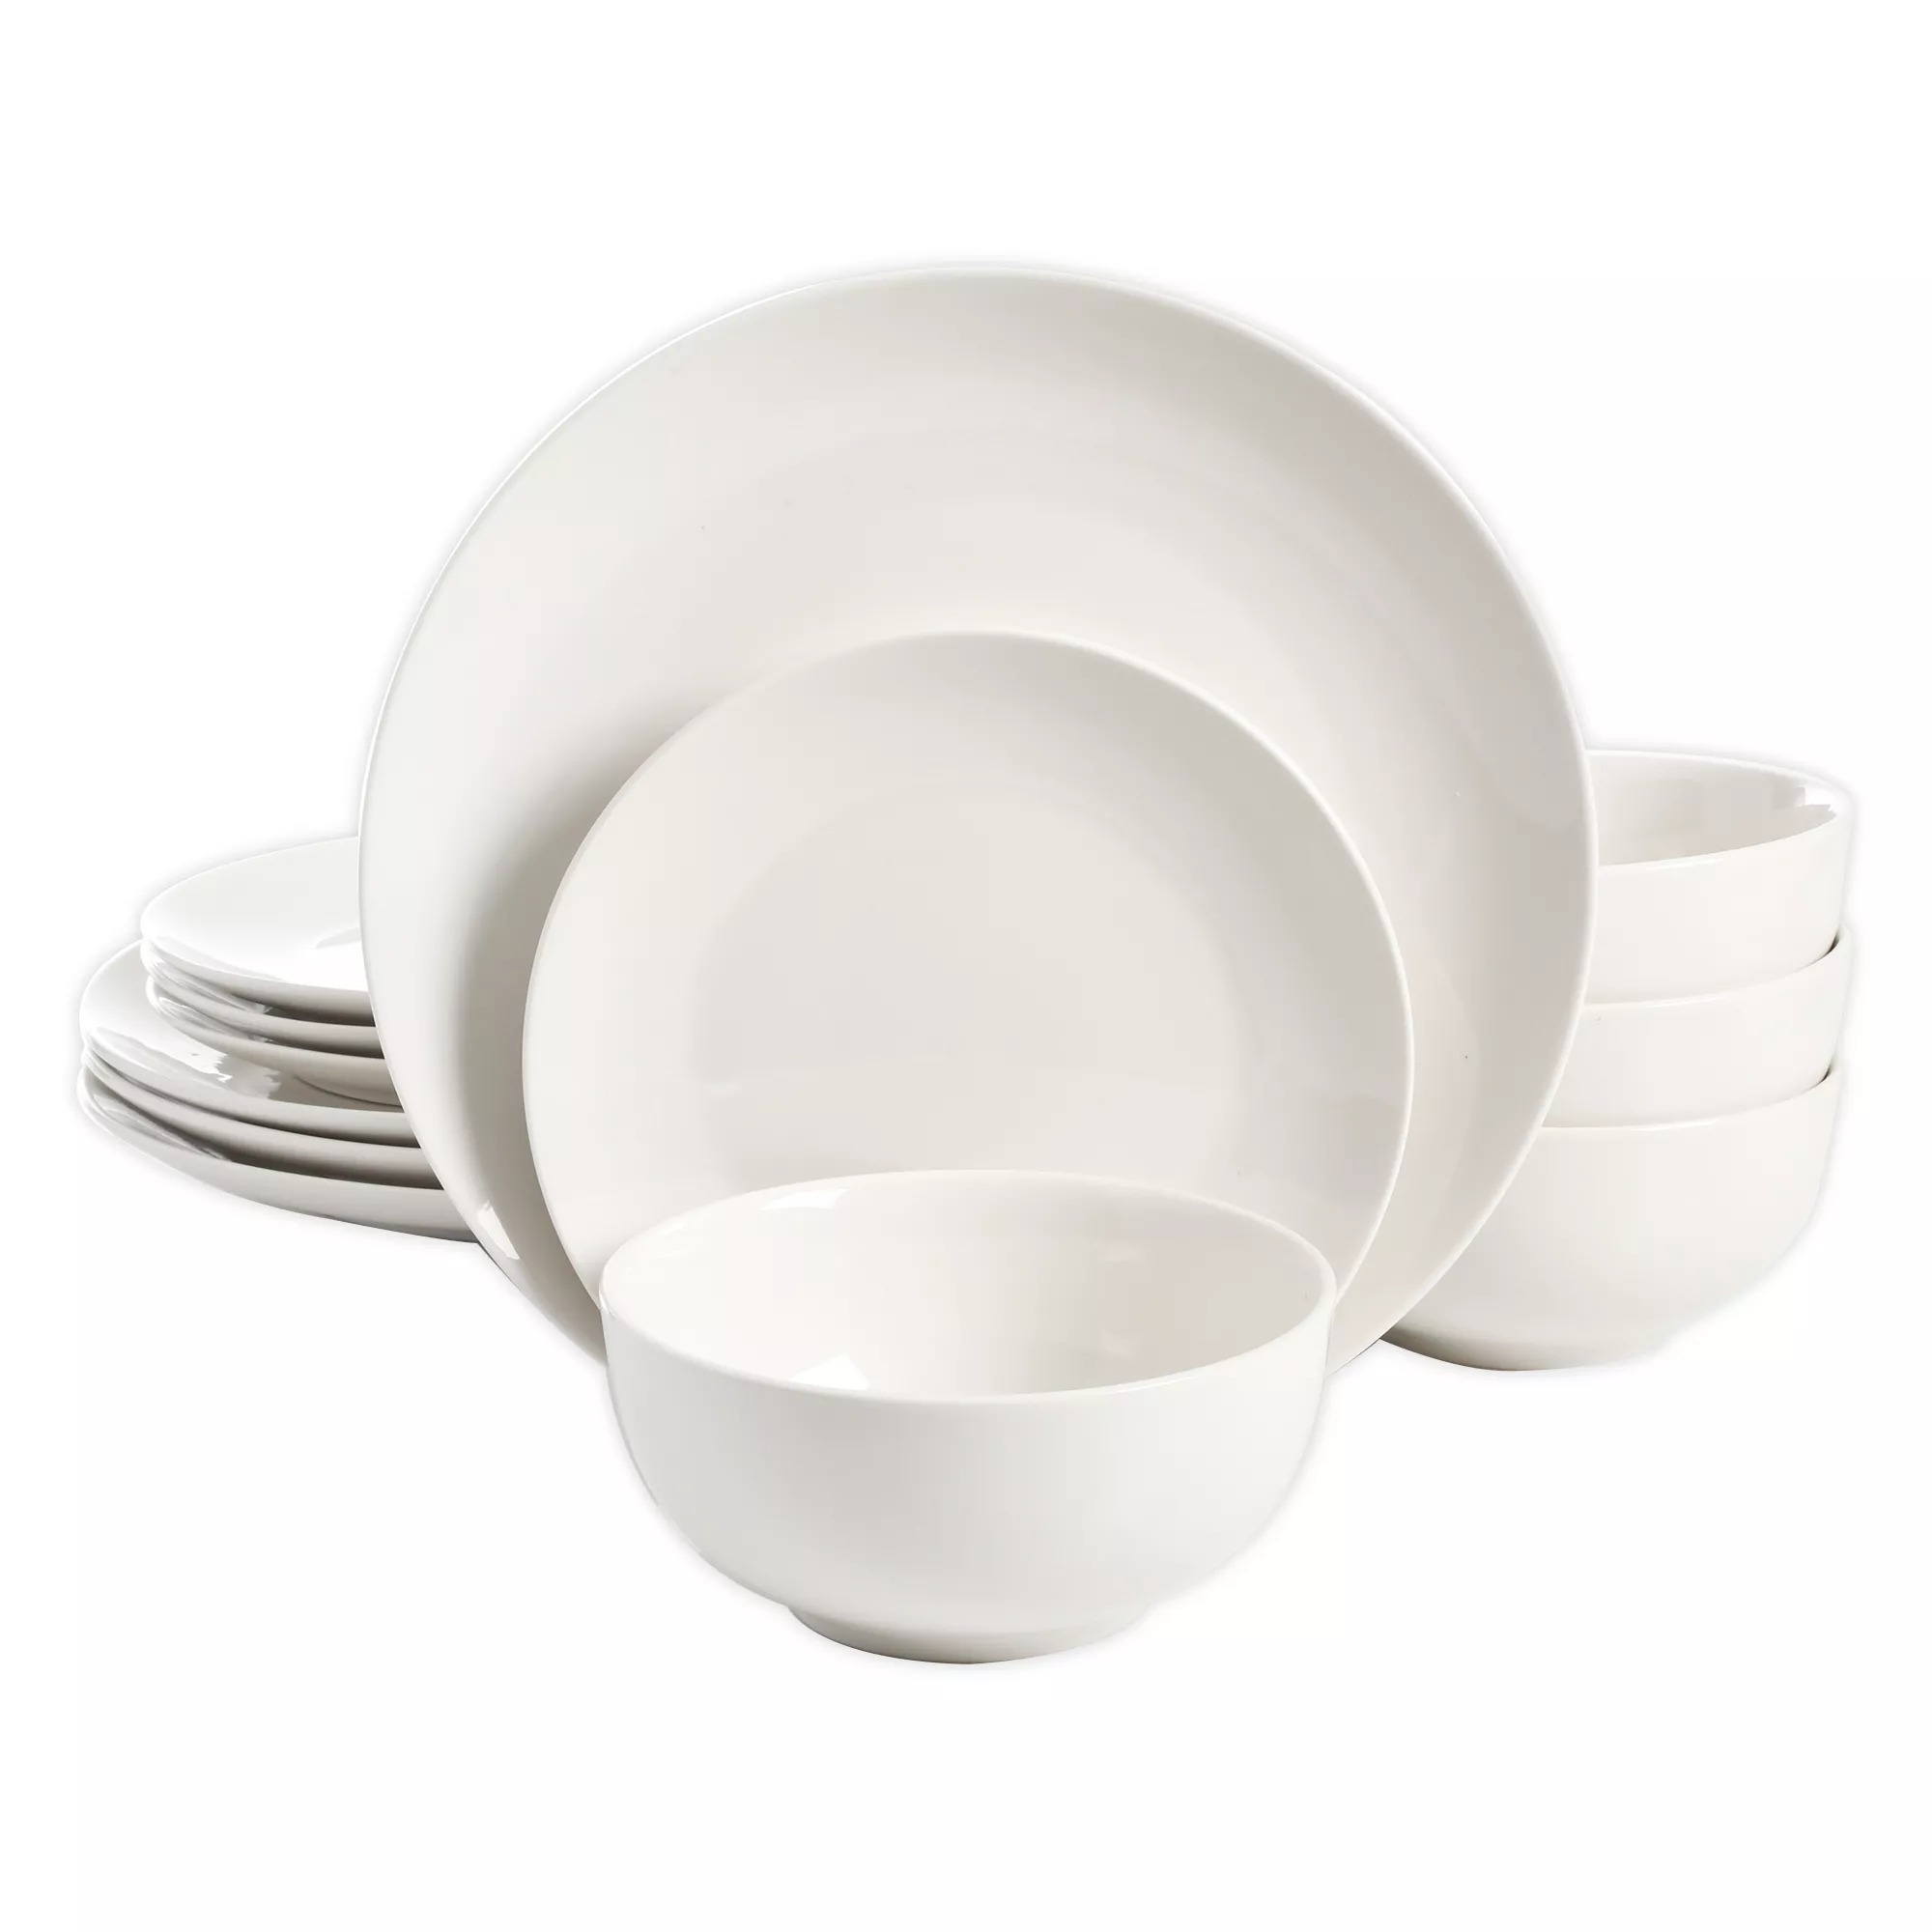 23 Affordable Dinnerware Sets to Upgrade Your Table